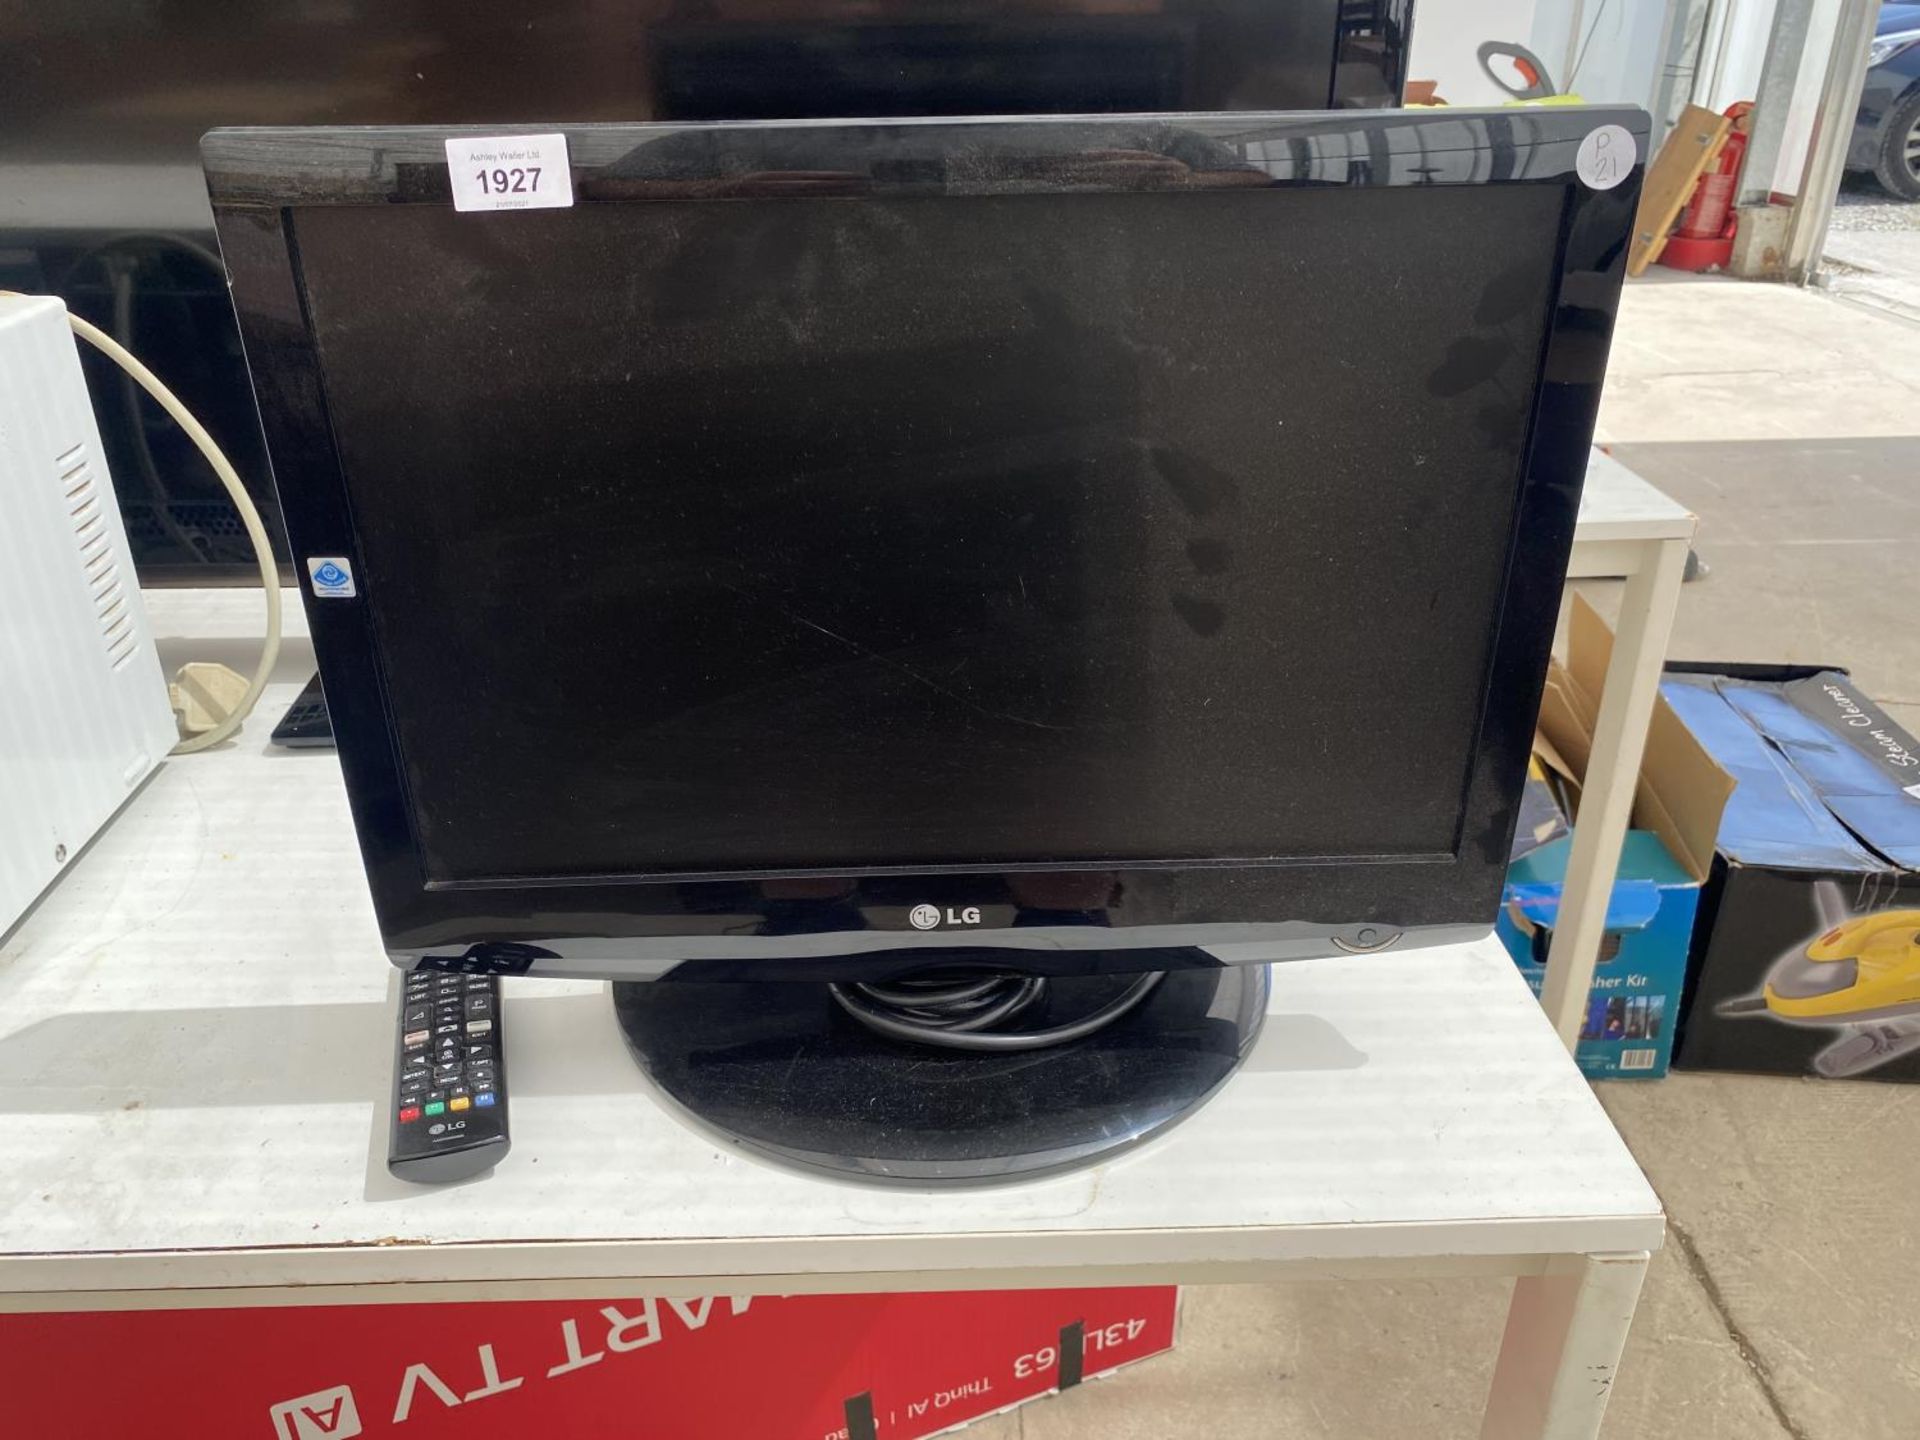 A 19" LG TELEVISION WITH REMOTE CONTROL